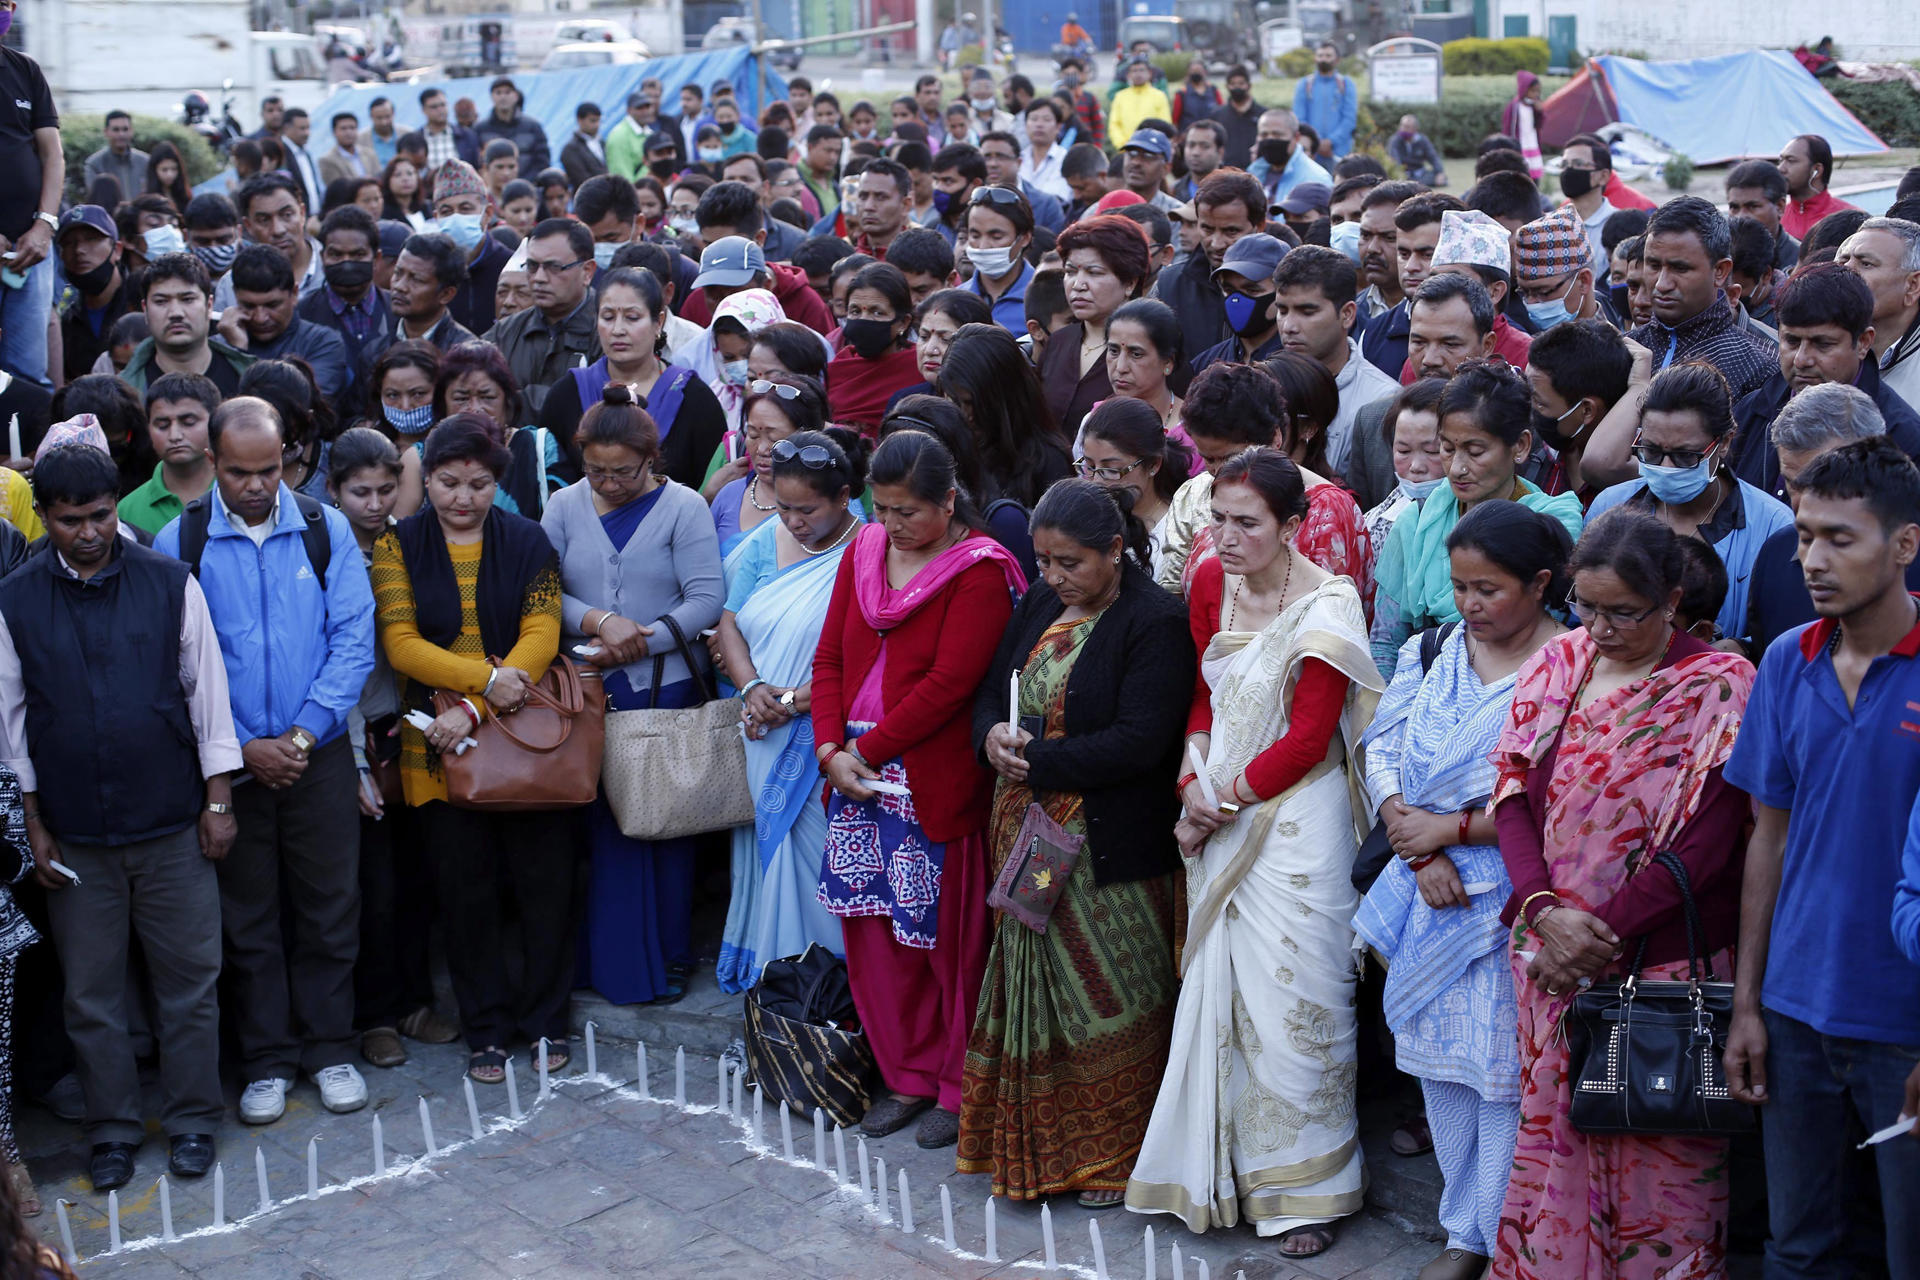 People from all walks of life attend a candlelight vigil to remember the earthquake victims organized by the Joint Trade Union Coordination Center at Babormahal, Kathmandu, Nepal, 01 May 2015. EPA/ABIR ABDULLAH/FILE